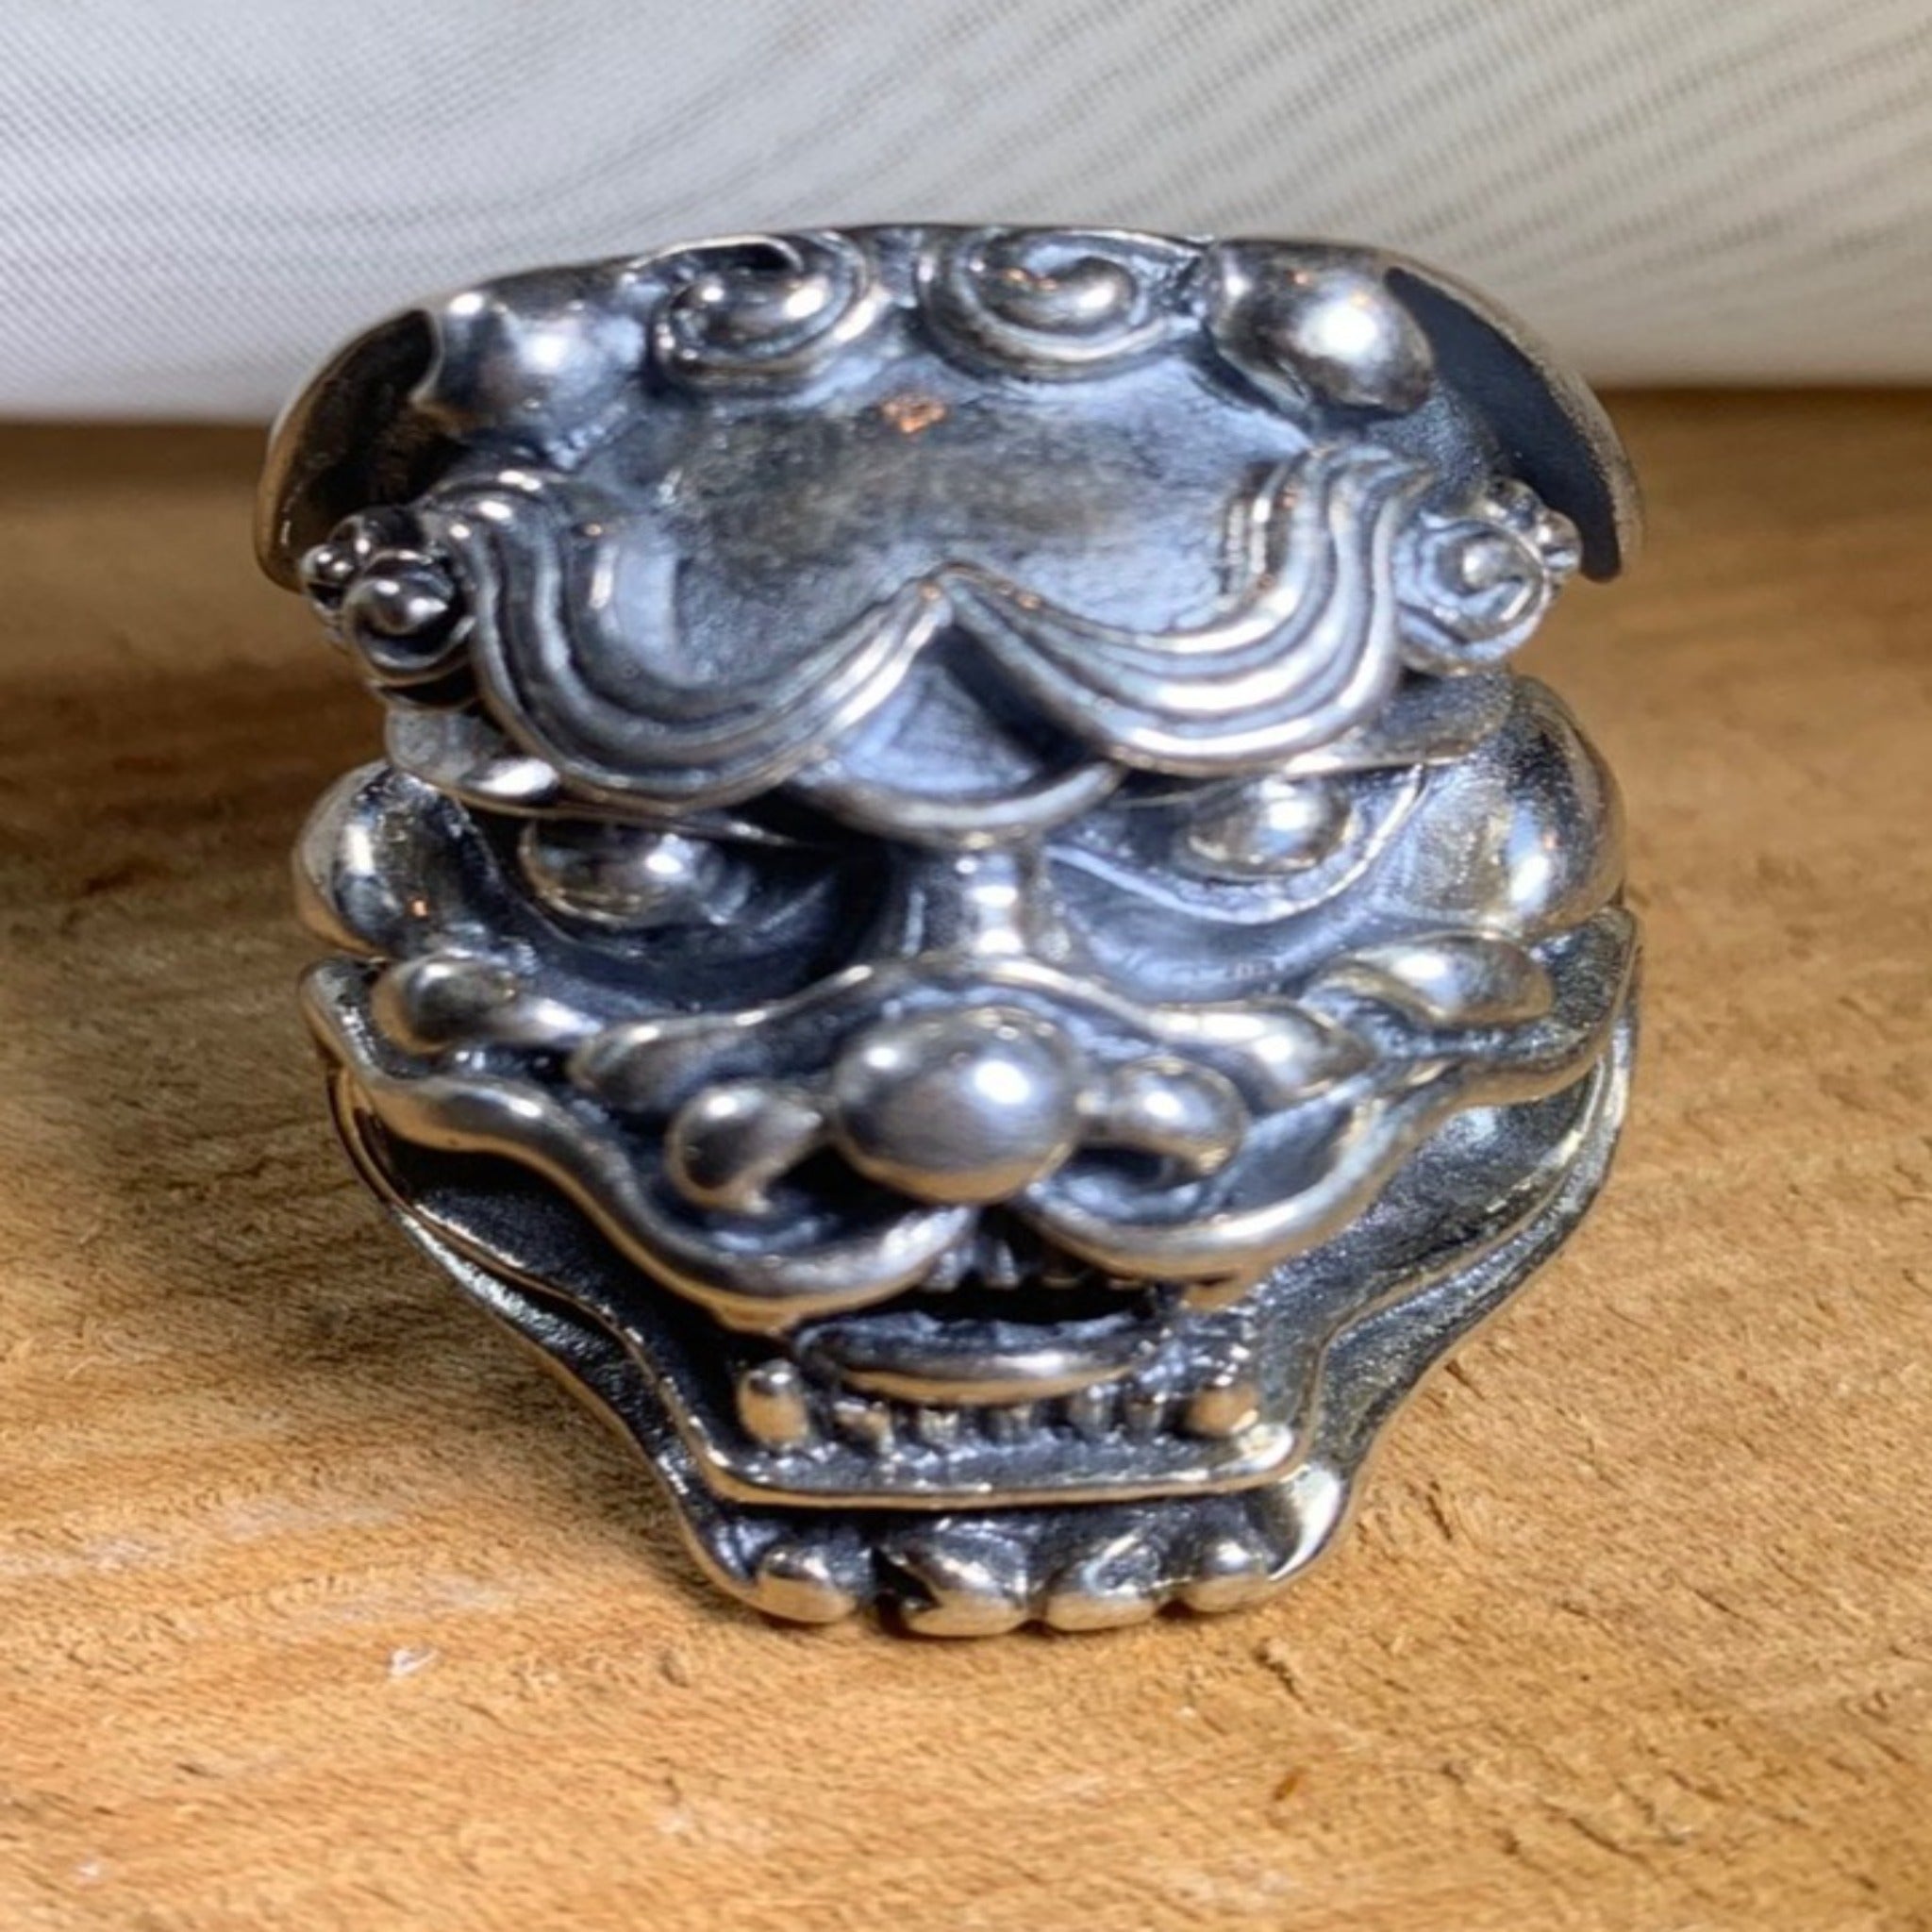 Ring - Temple Guardian Ring